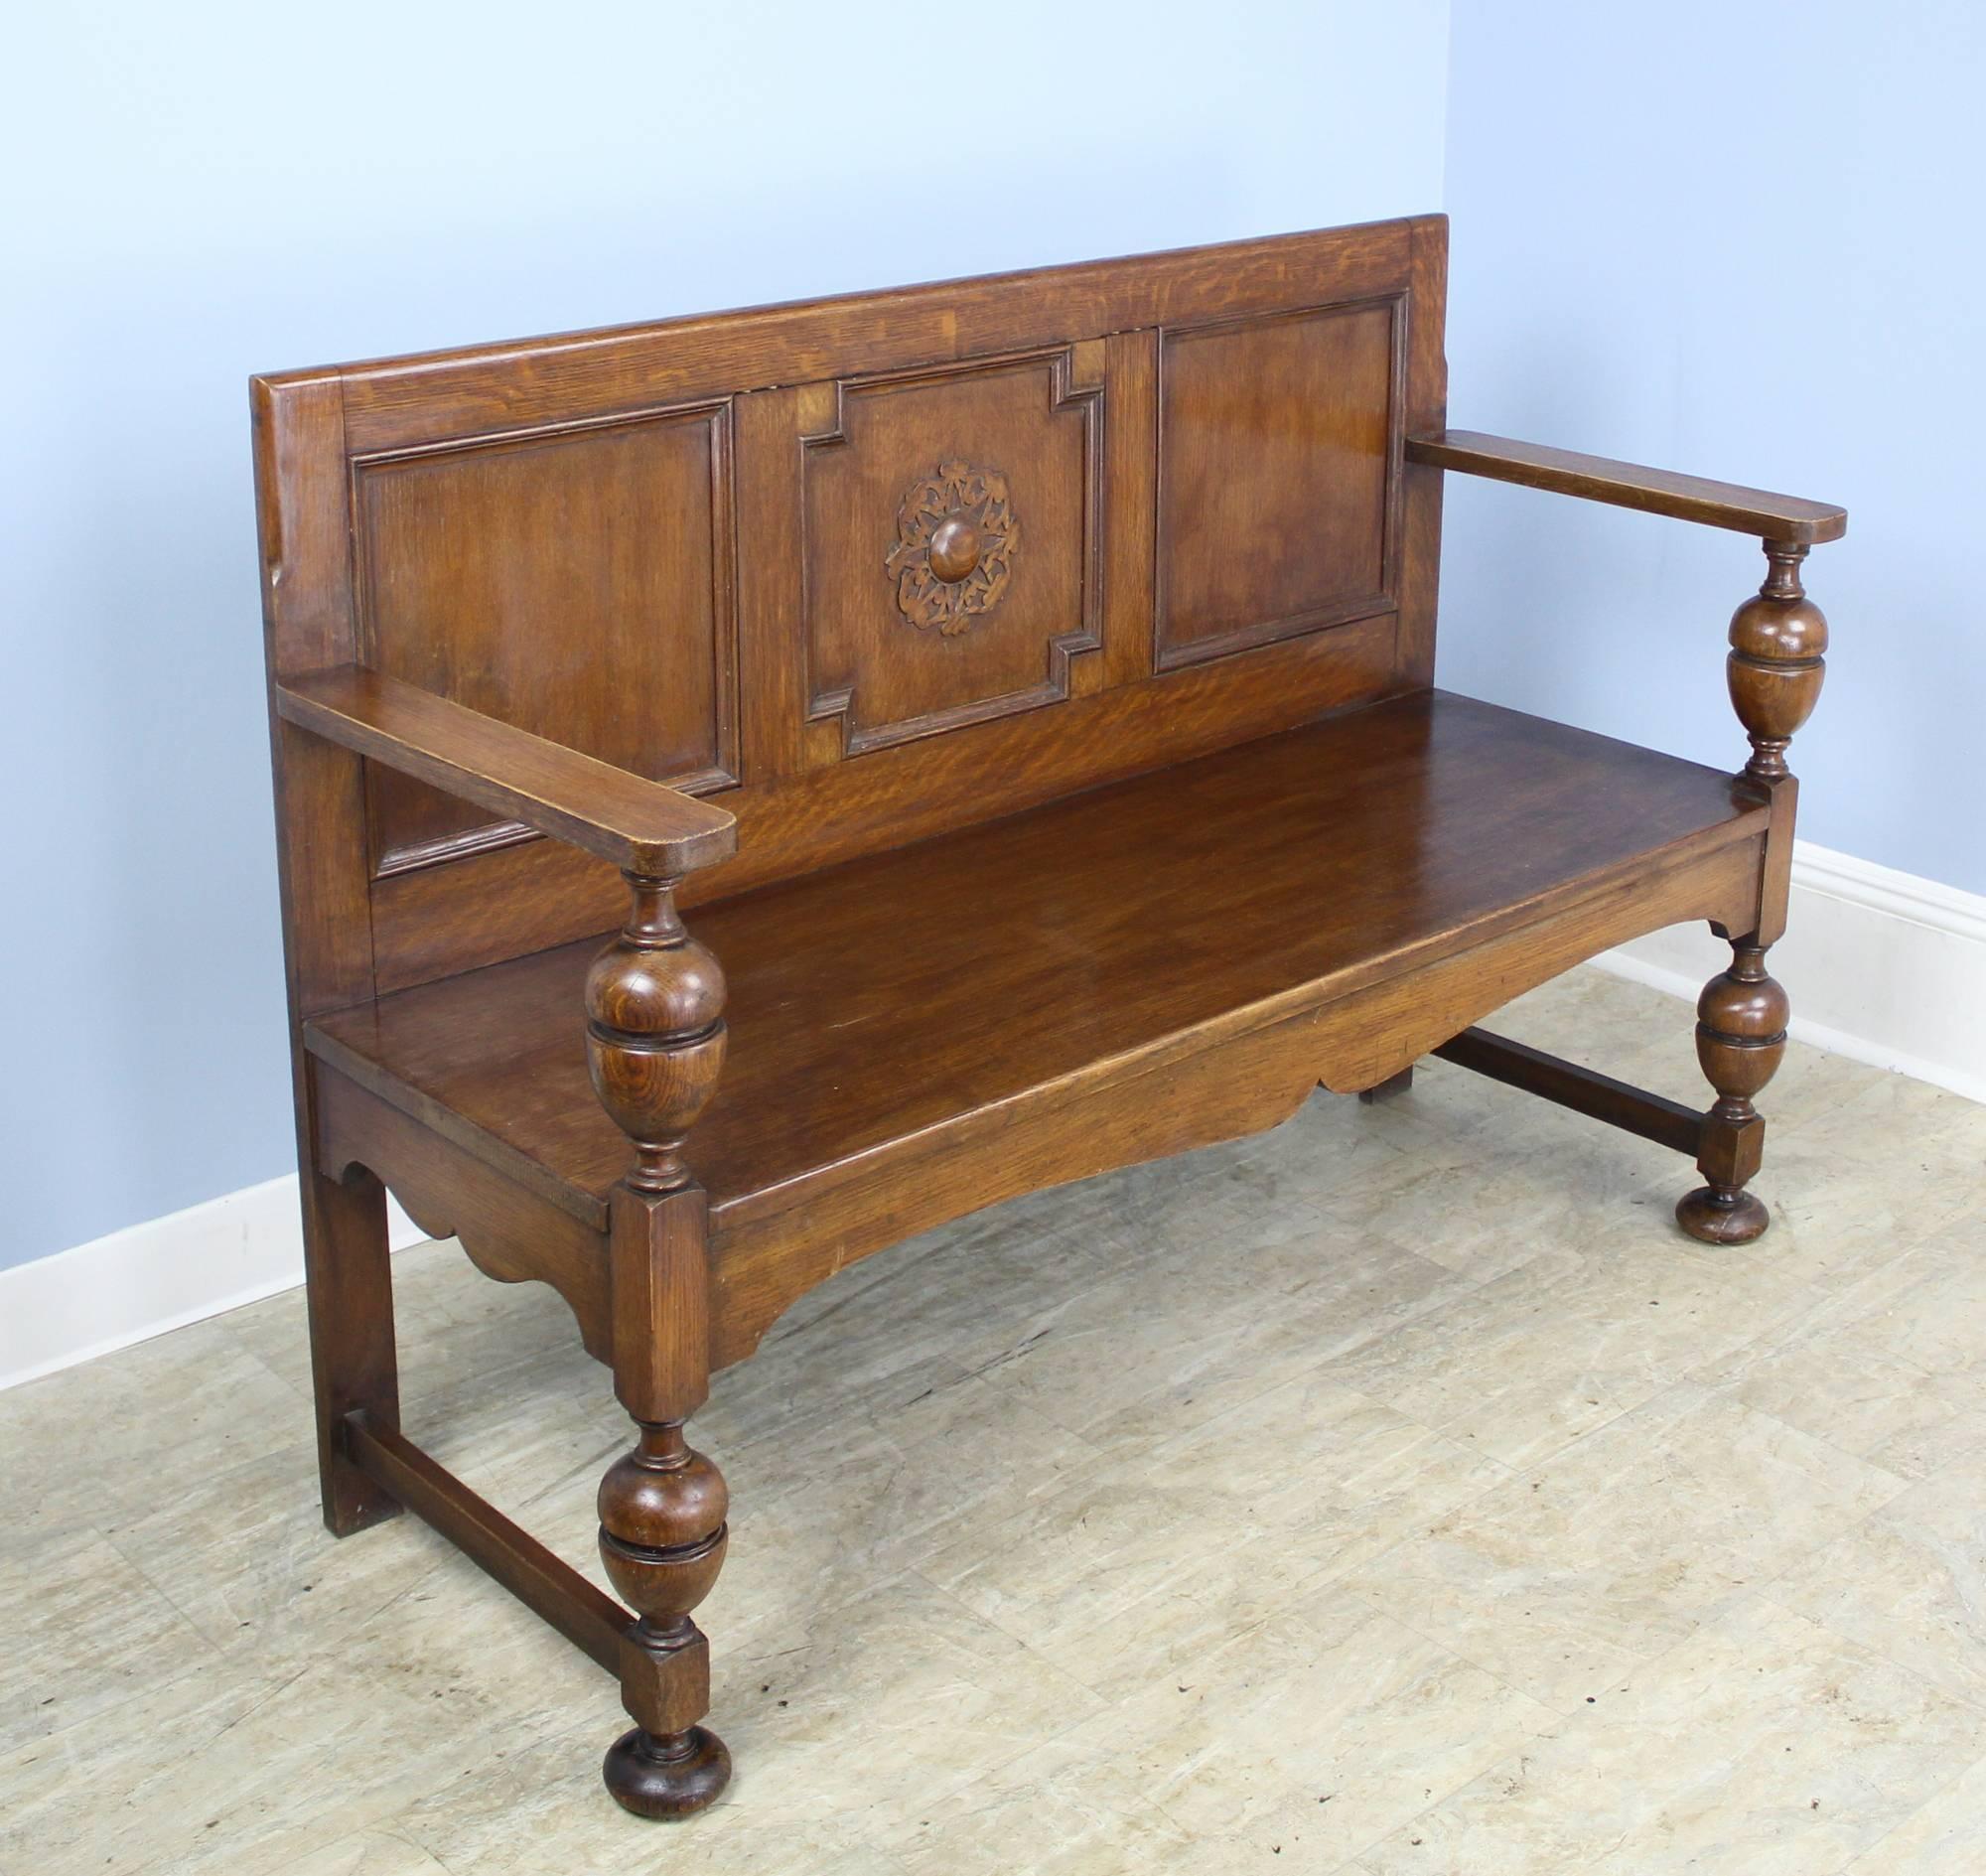 A handsome oak bench with a three panelled back featuring a carved medallion. Turned arms and legs with charming ball feet. Good seat height. Could be made an inch higher with a gusseted cushion.